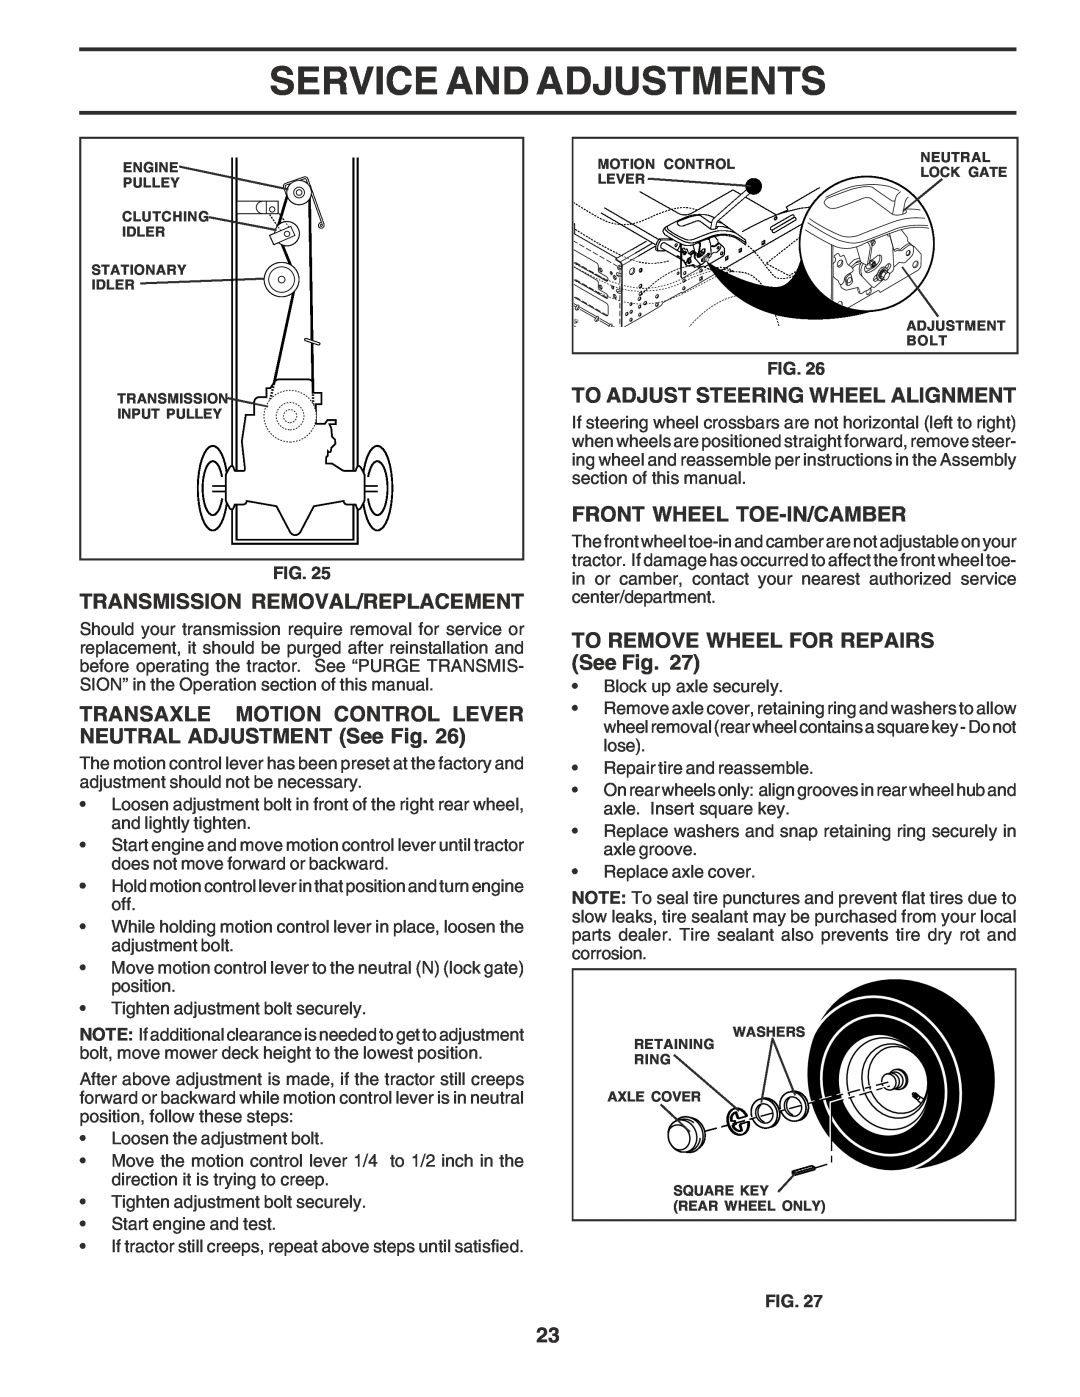 Poulan PPR20H42STA Transmission Removal/Replacement, To Adjust Steering Wheel Alignment, Front Wheel Toe-In/Camber 